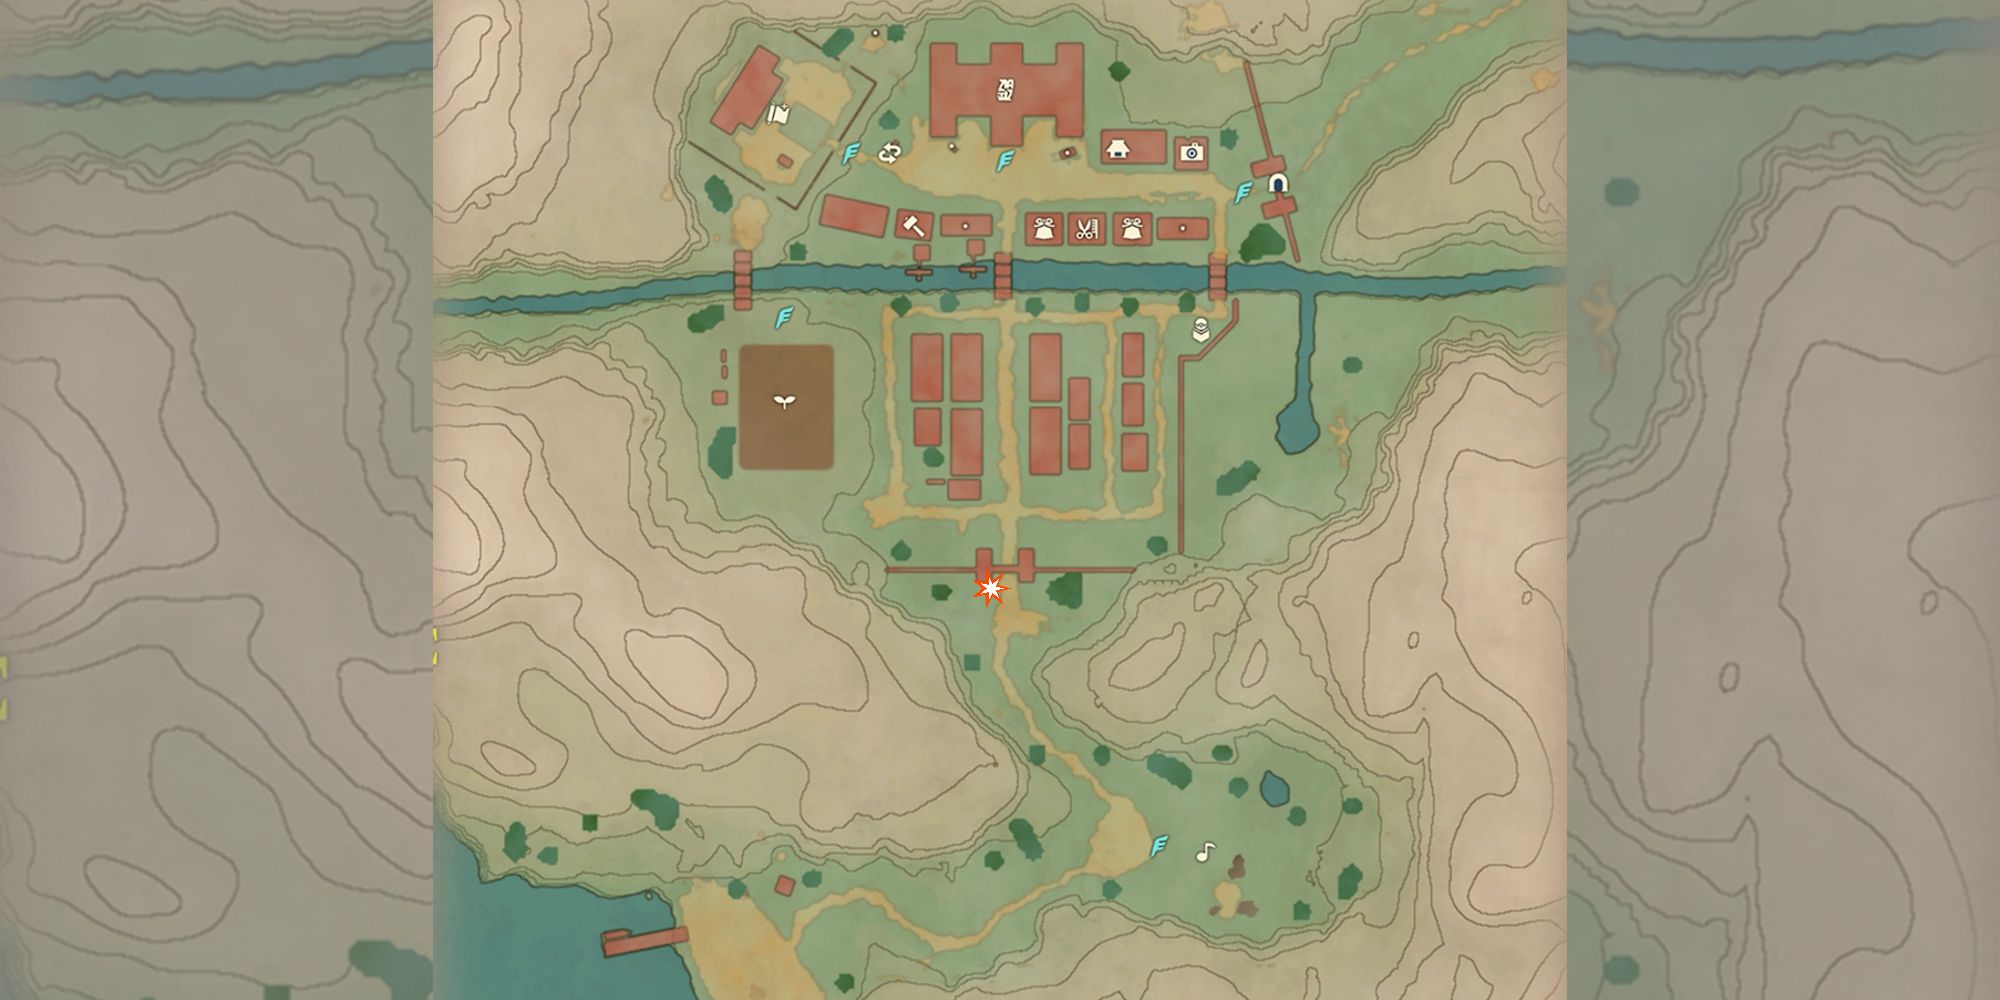 dorians location marked on map of jubilife village